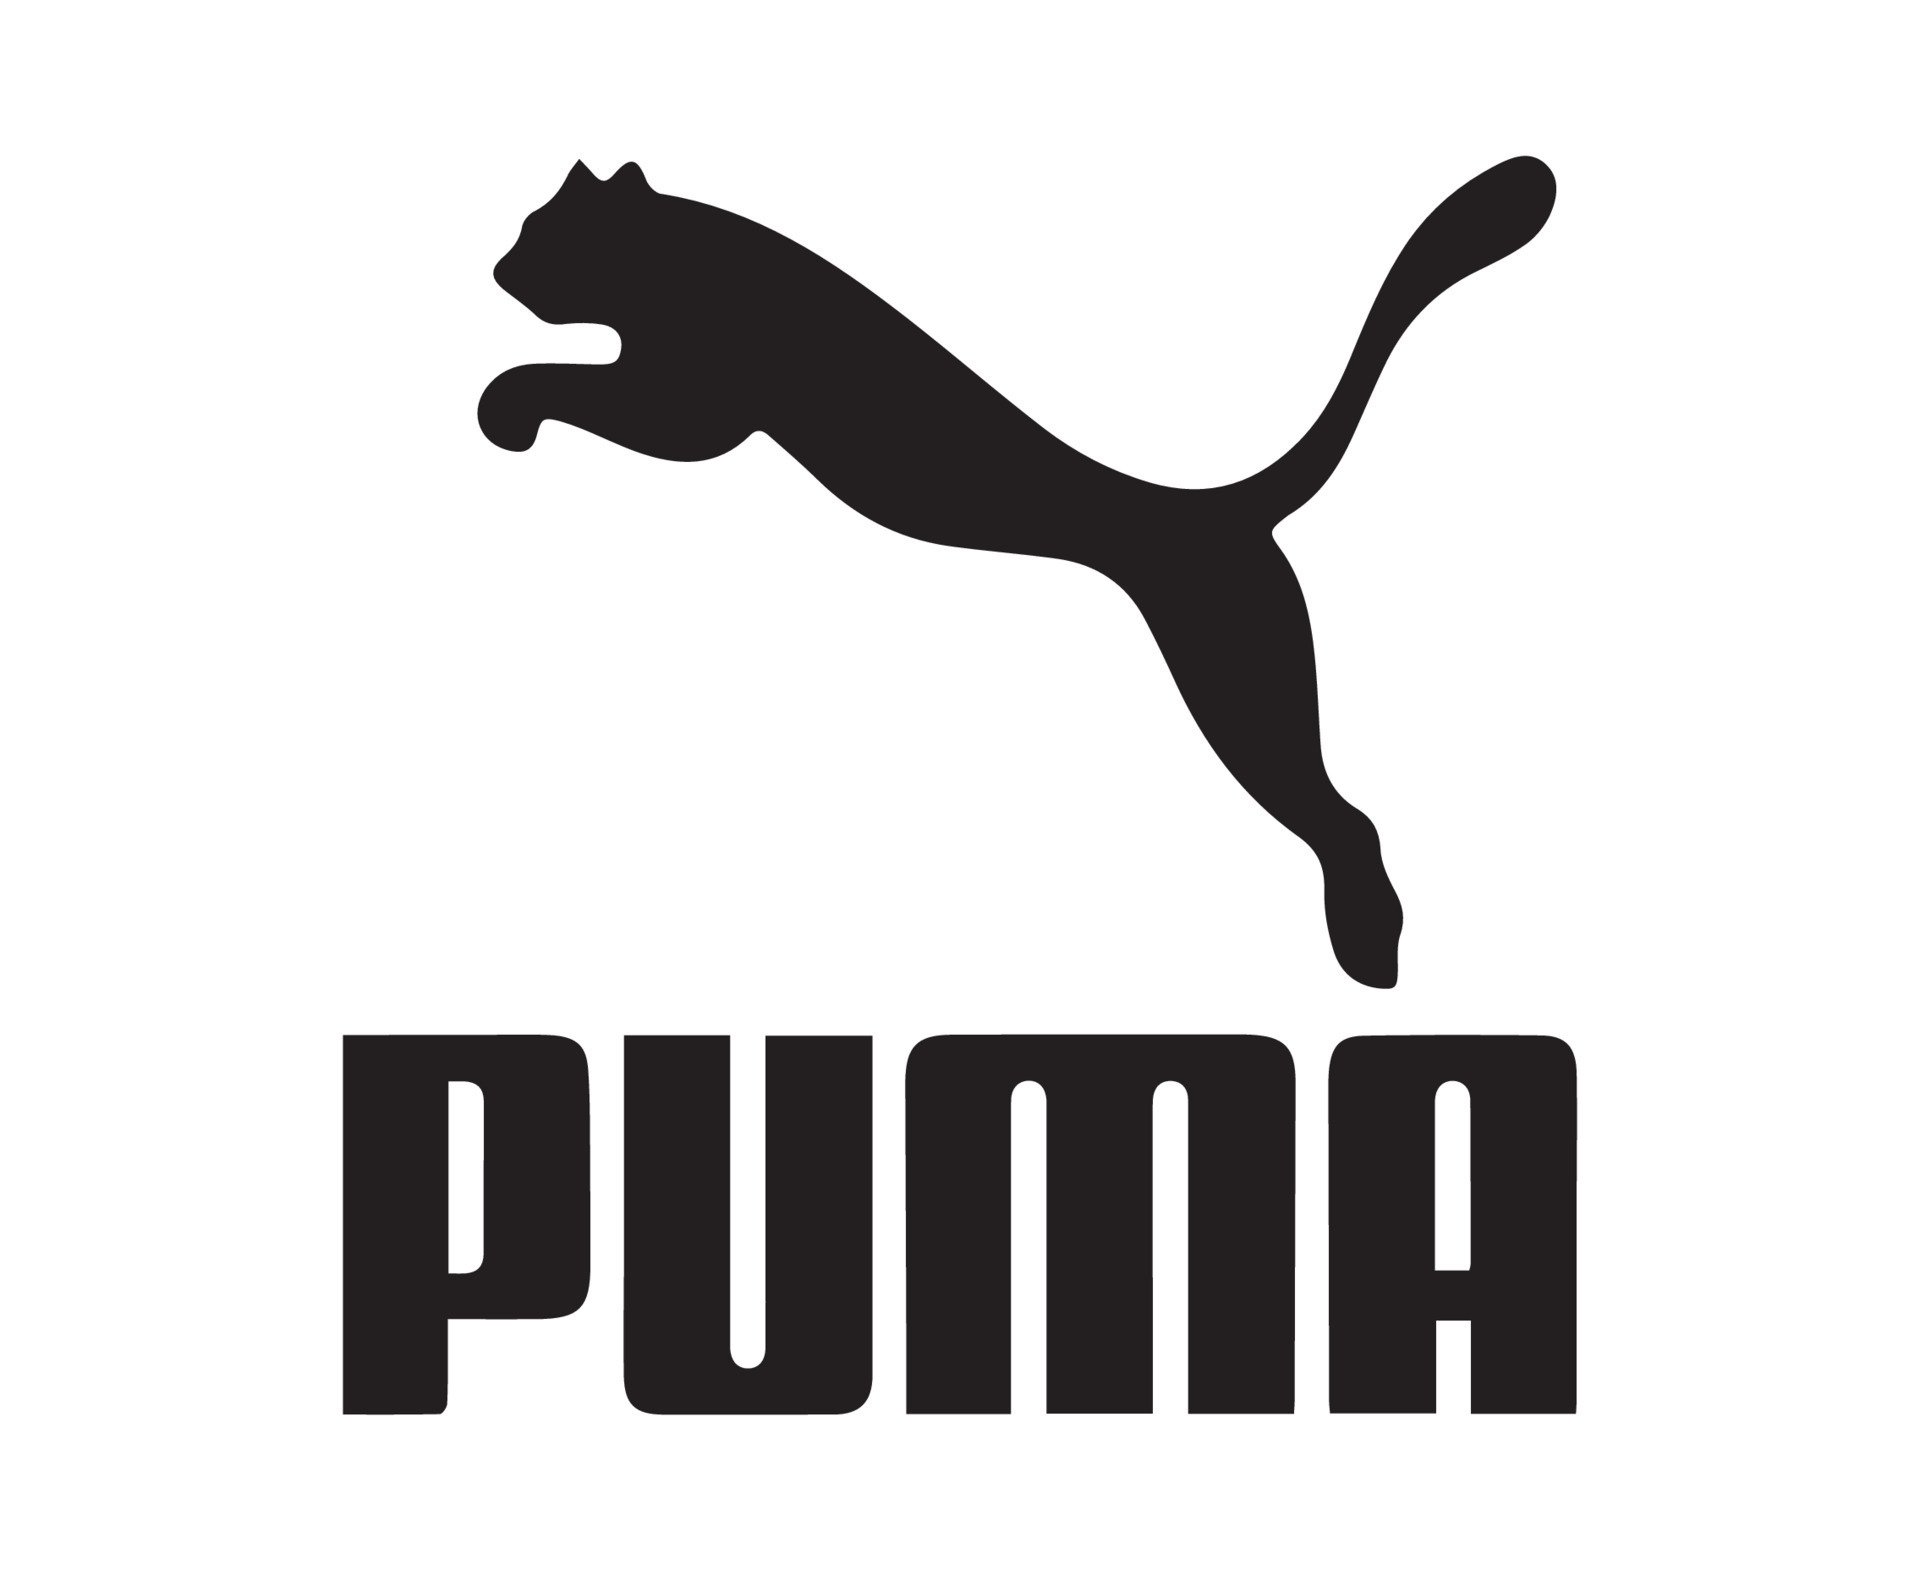 puma-logo-black-symbol-with-name-clothes-design-icon-abstract-football-illustration-with-white-background-free-vector.jpg